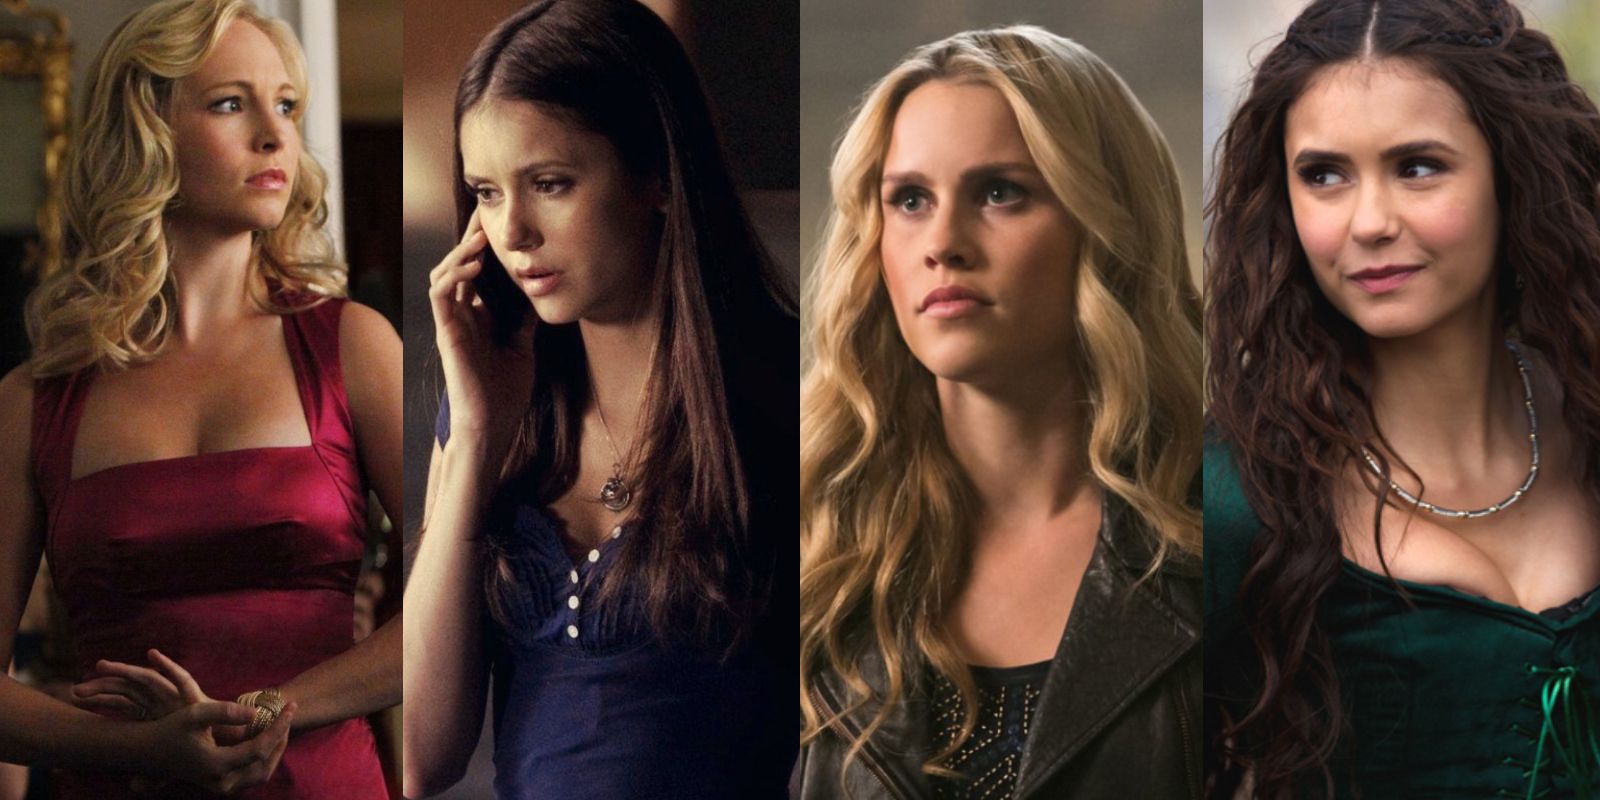 Stefan and Damon have a sister?!?! -Kol Mikaelson Love Story